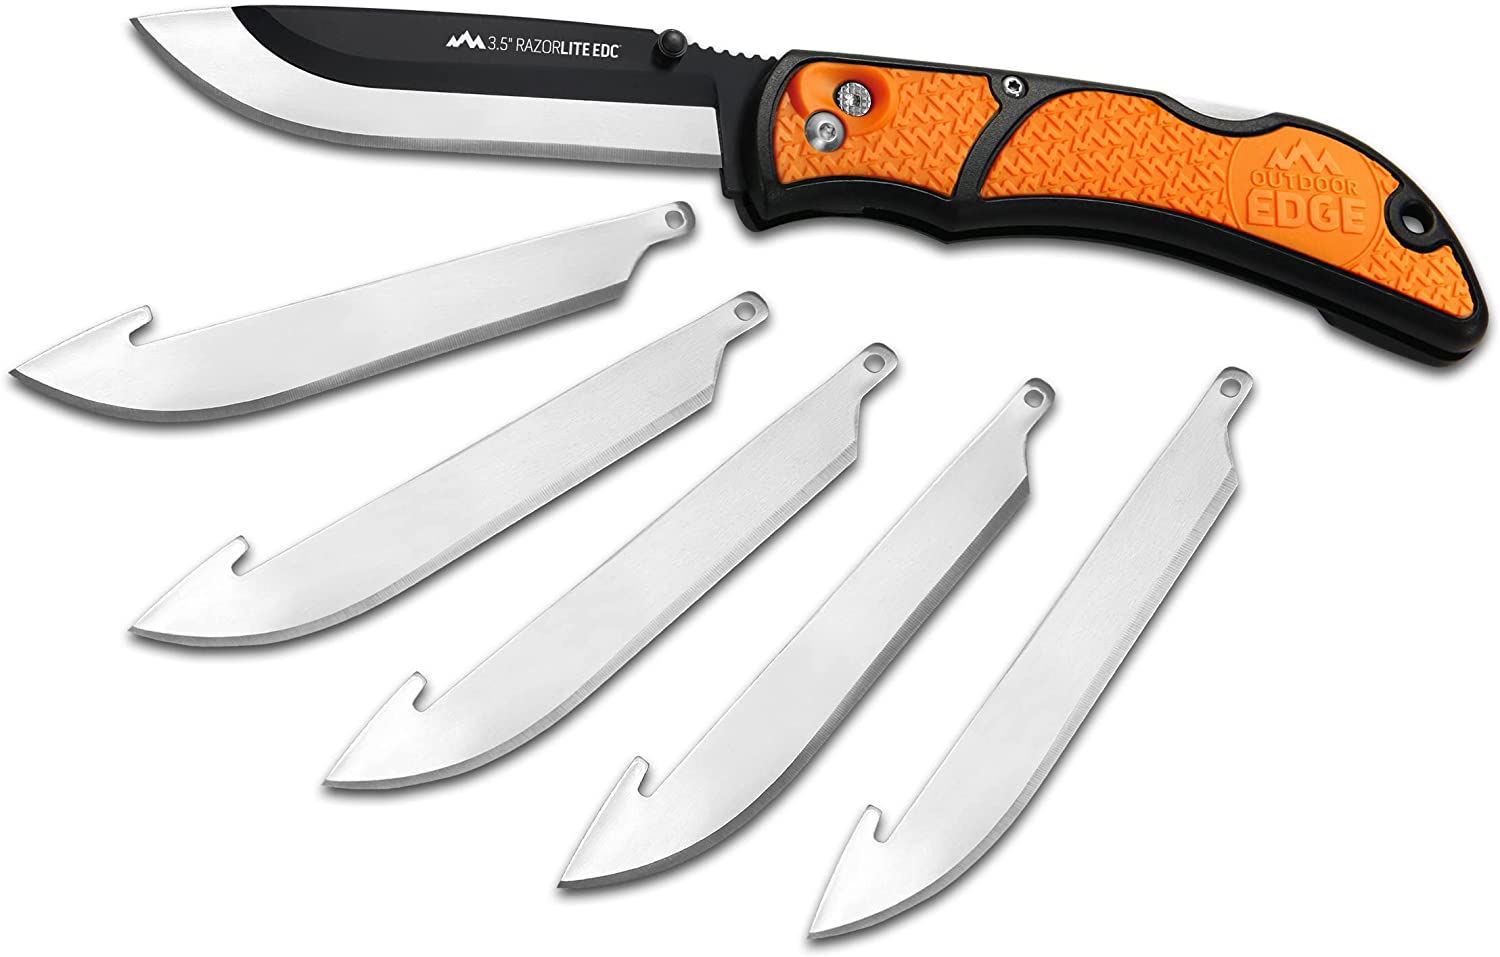 OUTDOOR EDGE 3.5" RazorLite EDC – Replaceable Blade Folding Knife with Pocket Clip and One Hand Opening for Everyday Carry (Orange, 6 Blades)